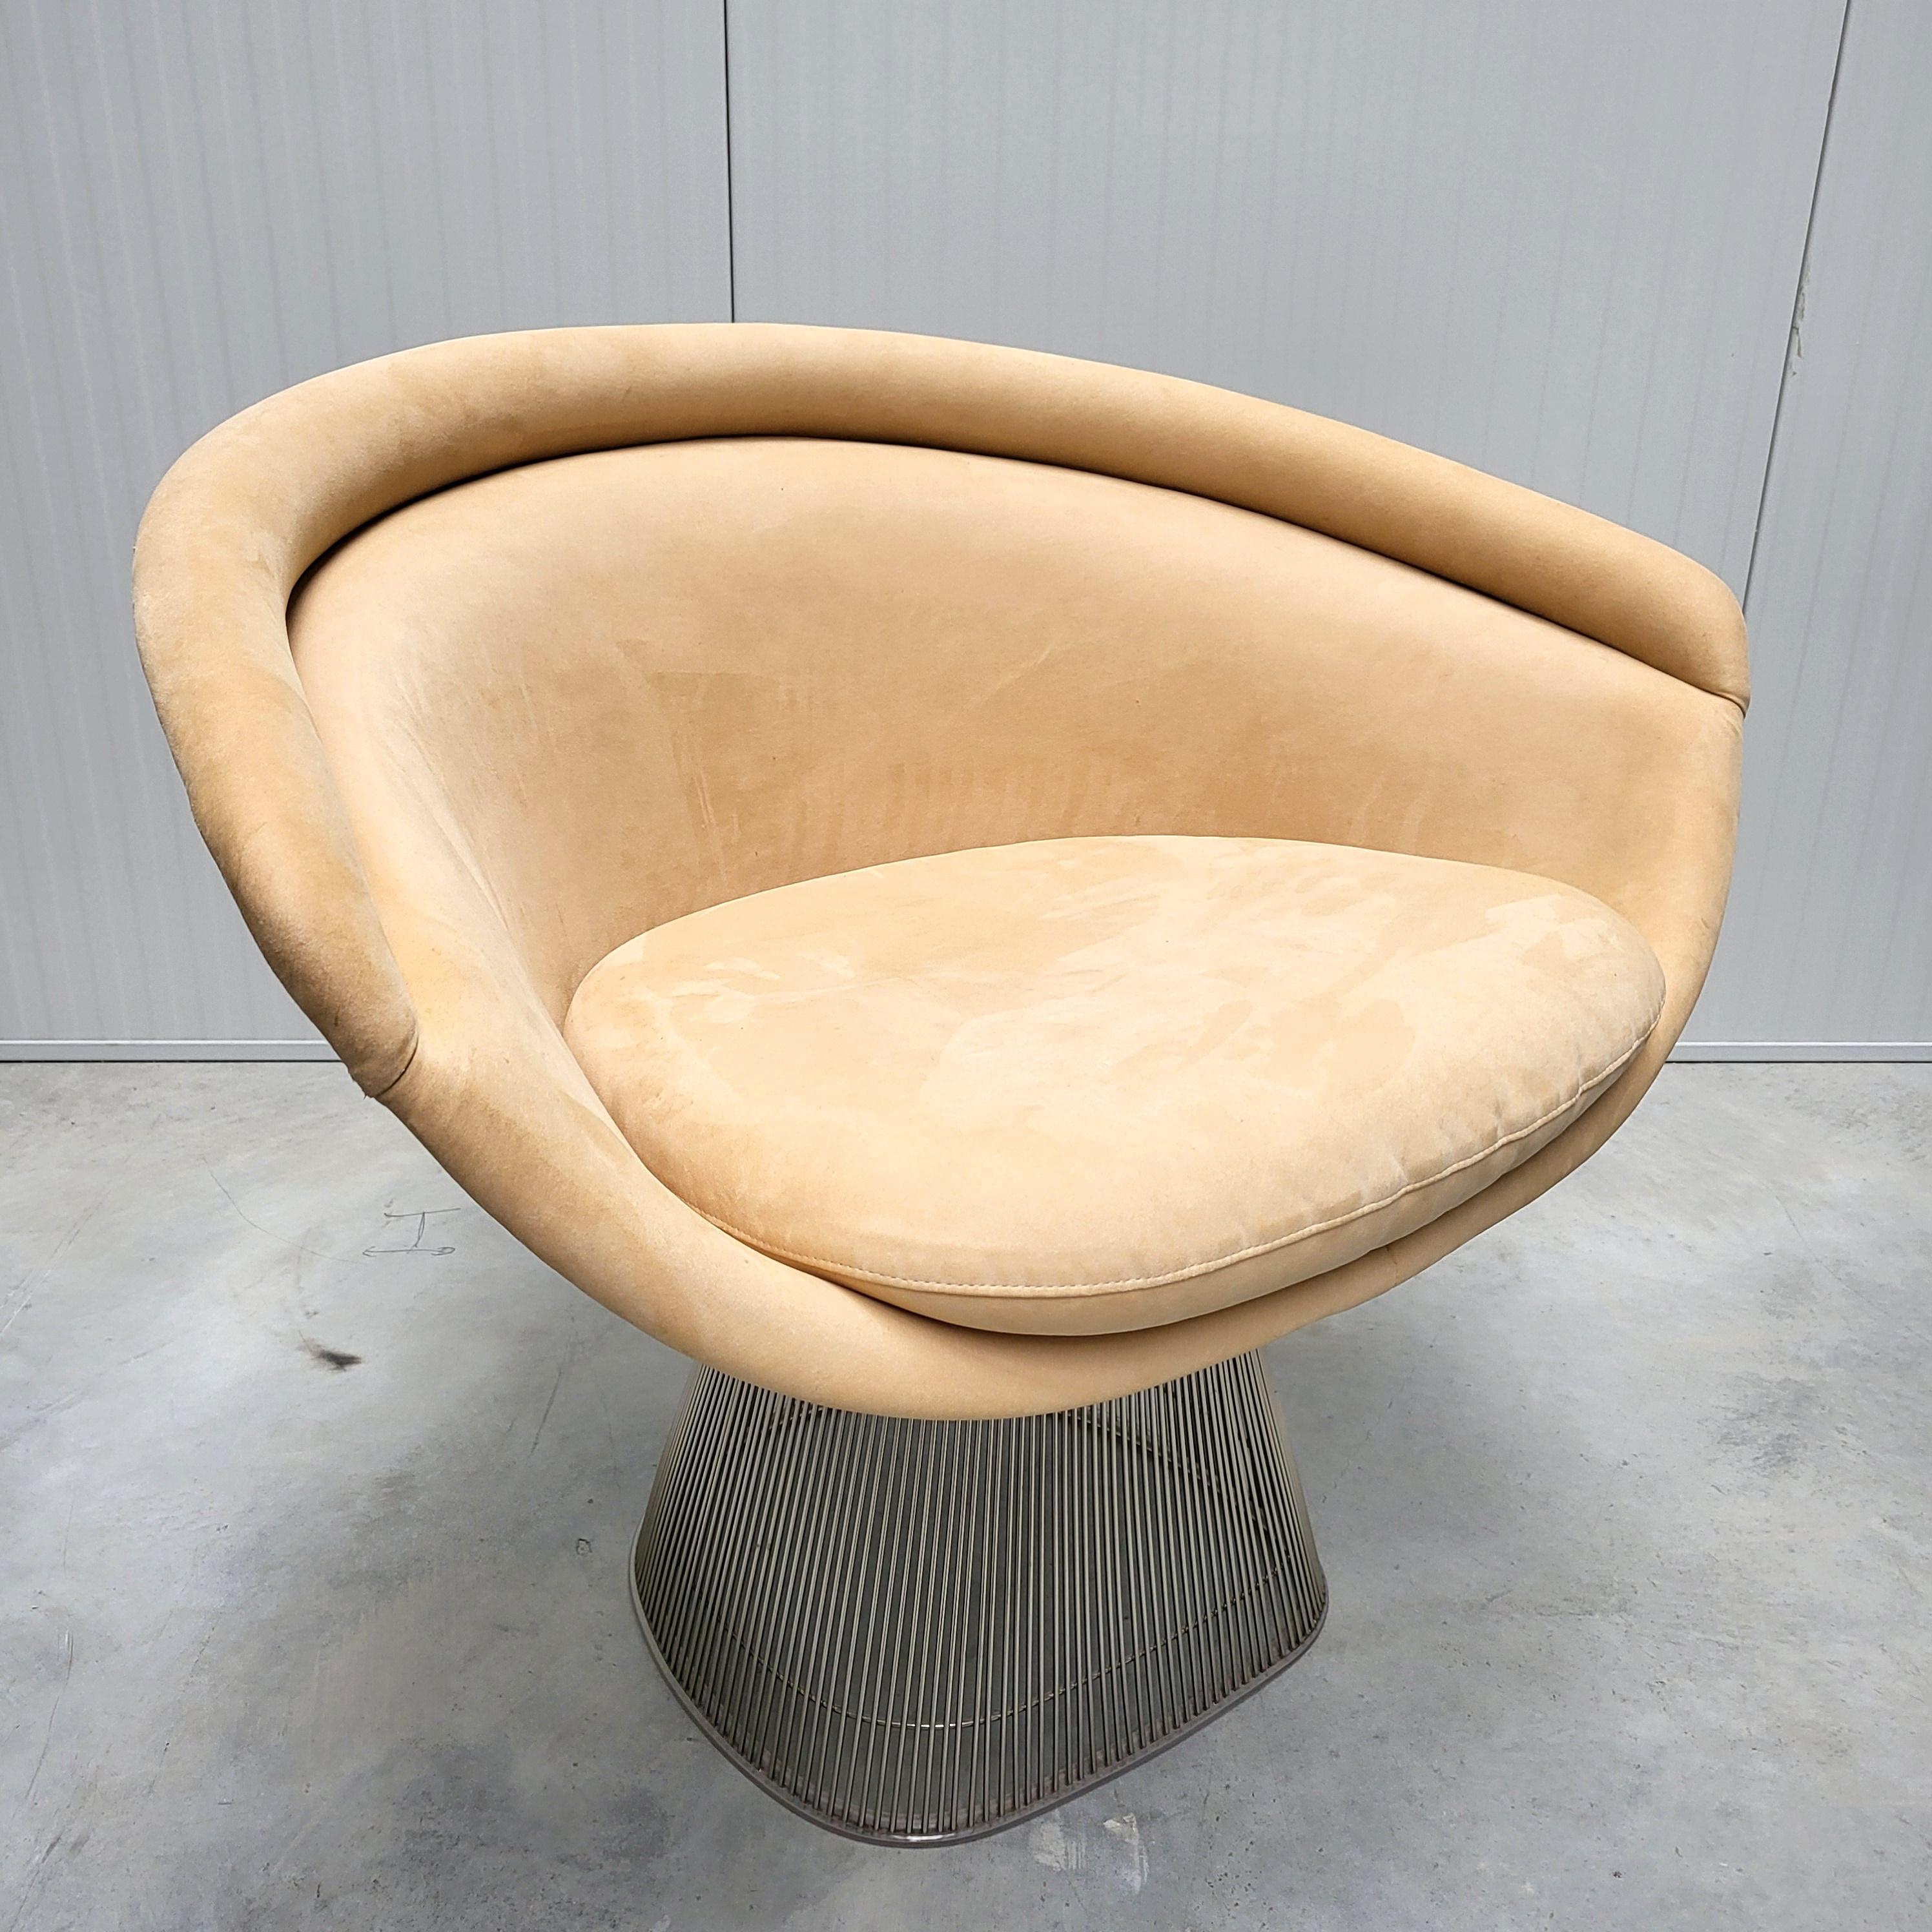 Impressive Beige Ivory Ultra Suede Lounge chair by Warren Platner for Knoll. 

The groundbreaking lounge chair was designed in the 1960s by Warren Platner and produced by Knoll in the early 2000s. This mid-century classic supports countless